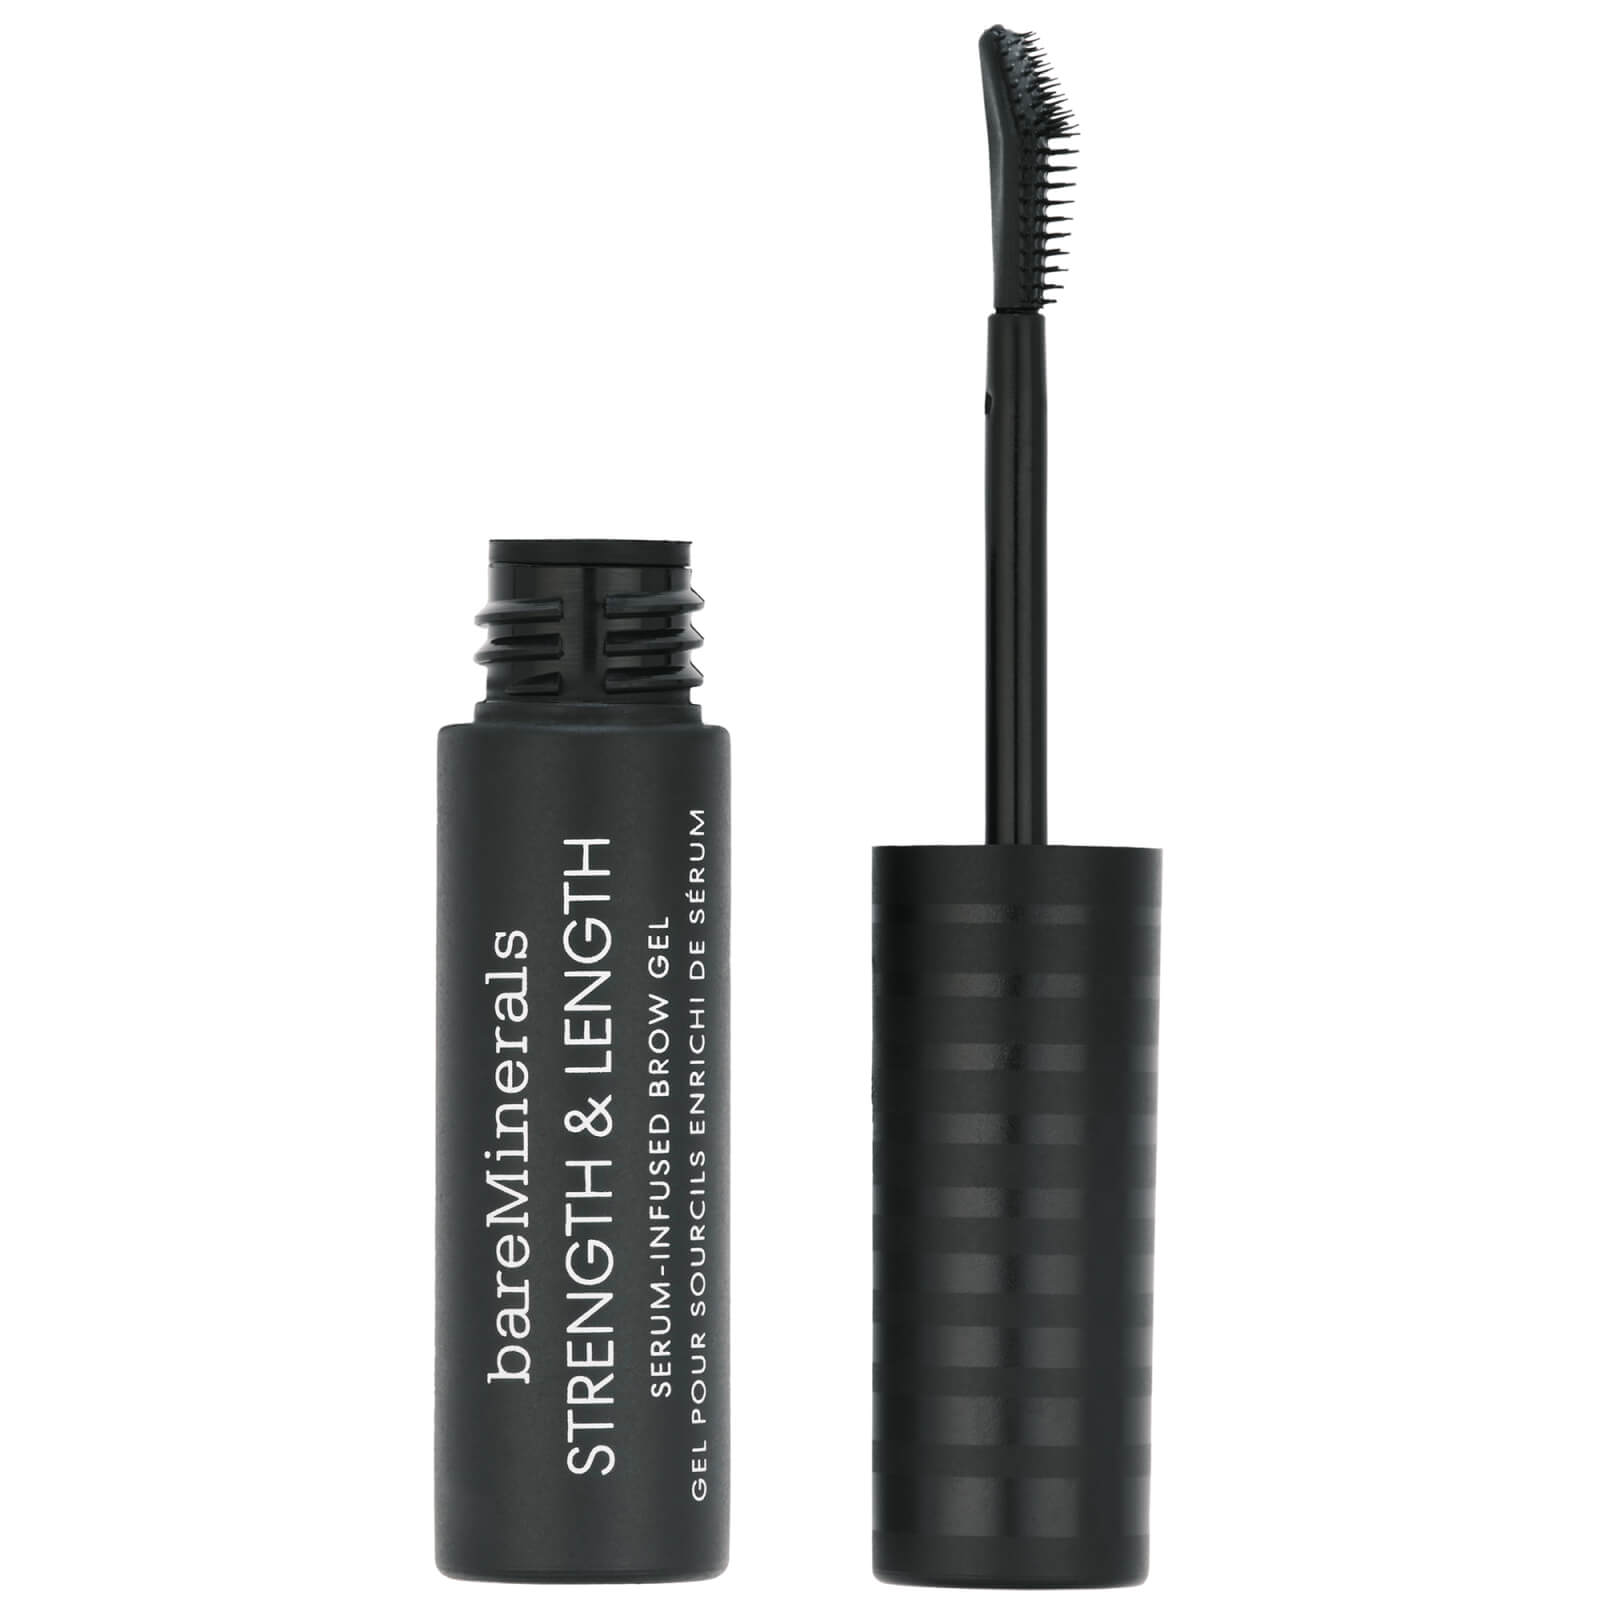 bareMinerals Strength and Length Brow Gel 5ml (Various Shades) - Clear